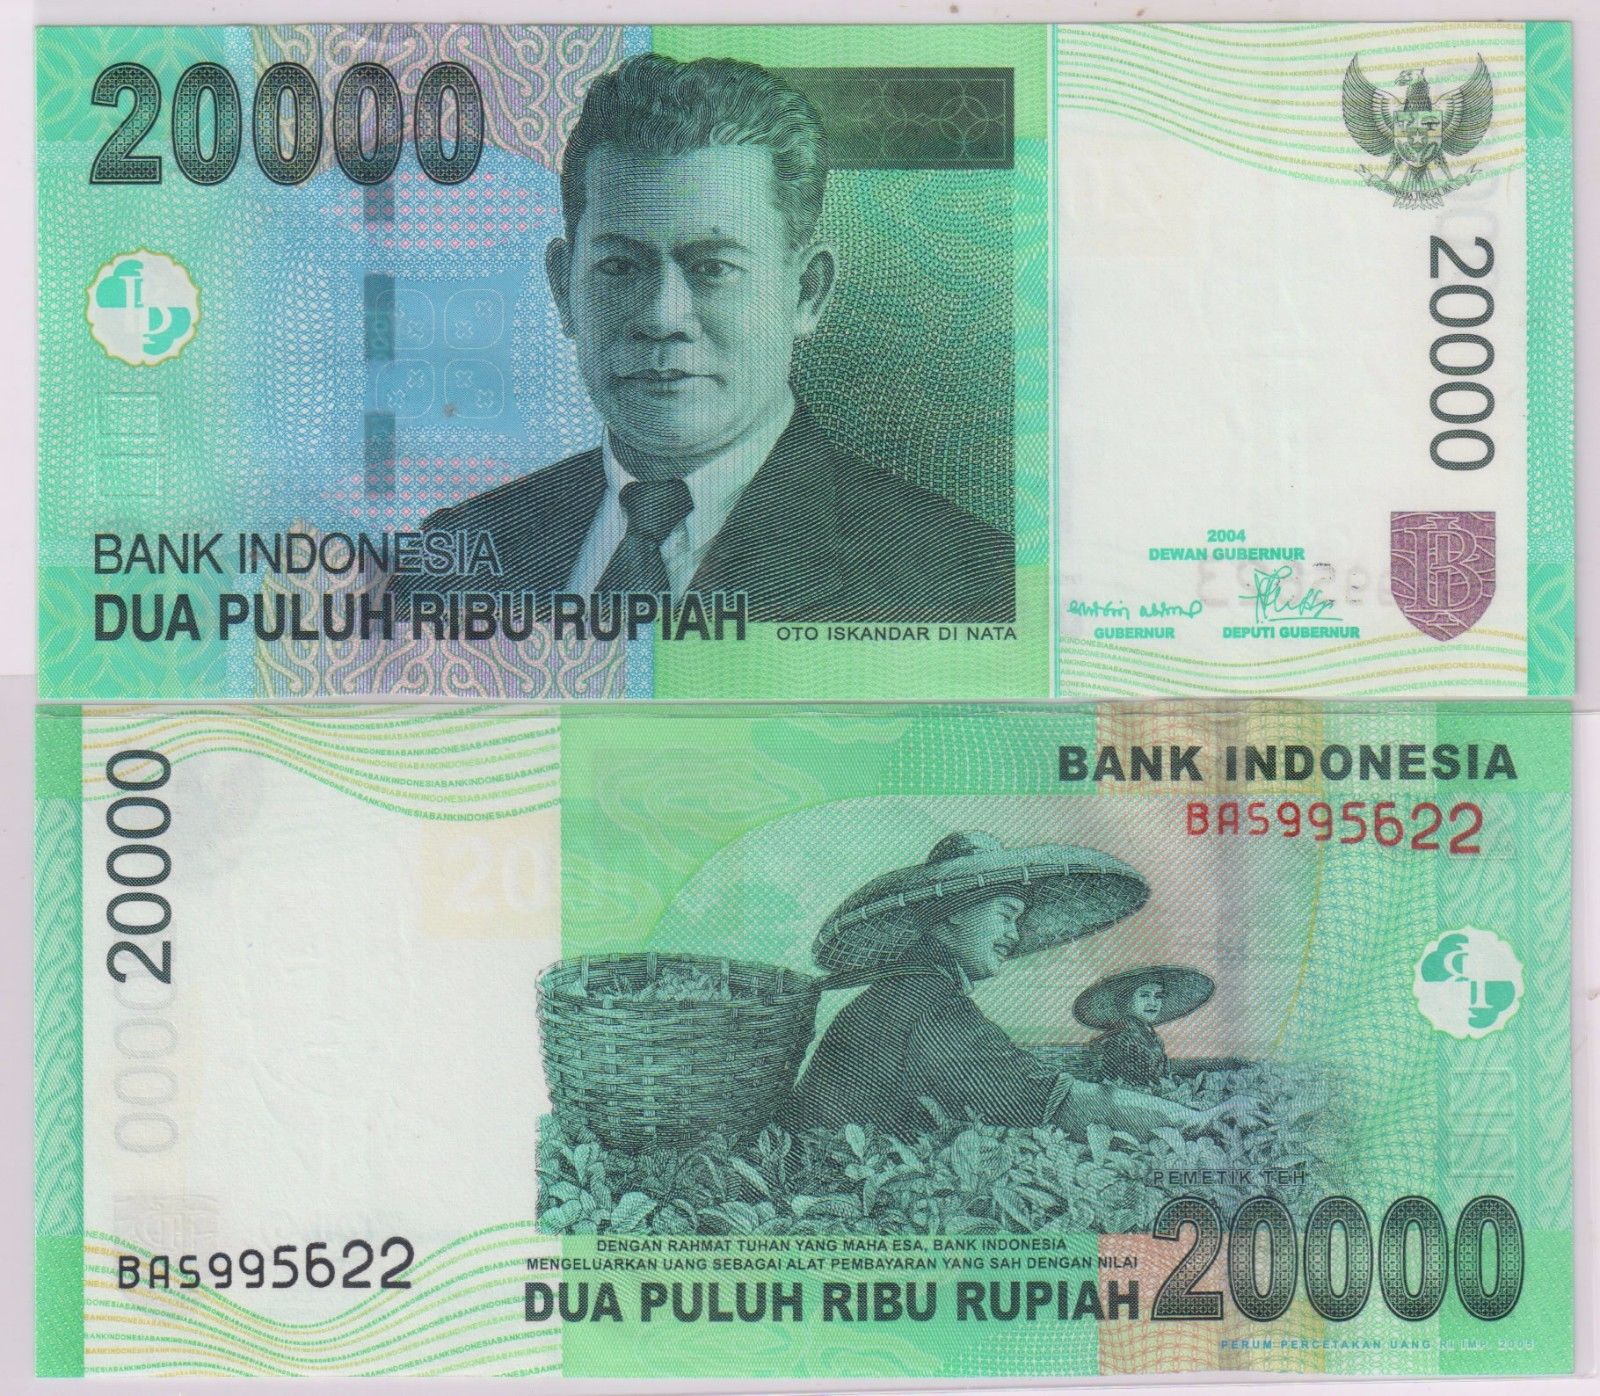  Indonesia  20000 rupiah unc currency  note  KB Coins 